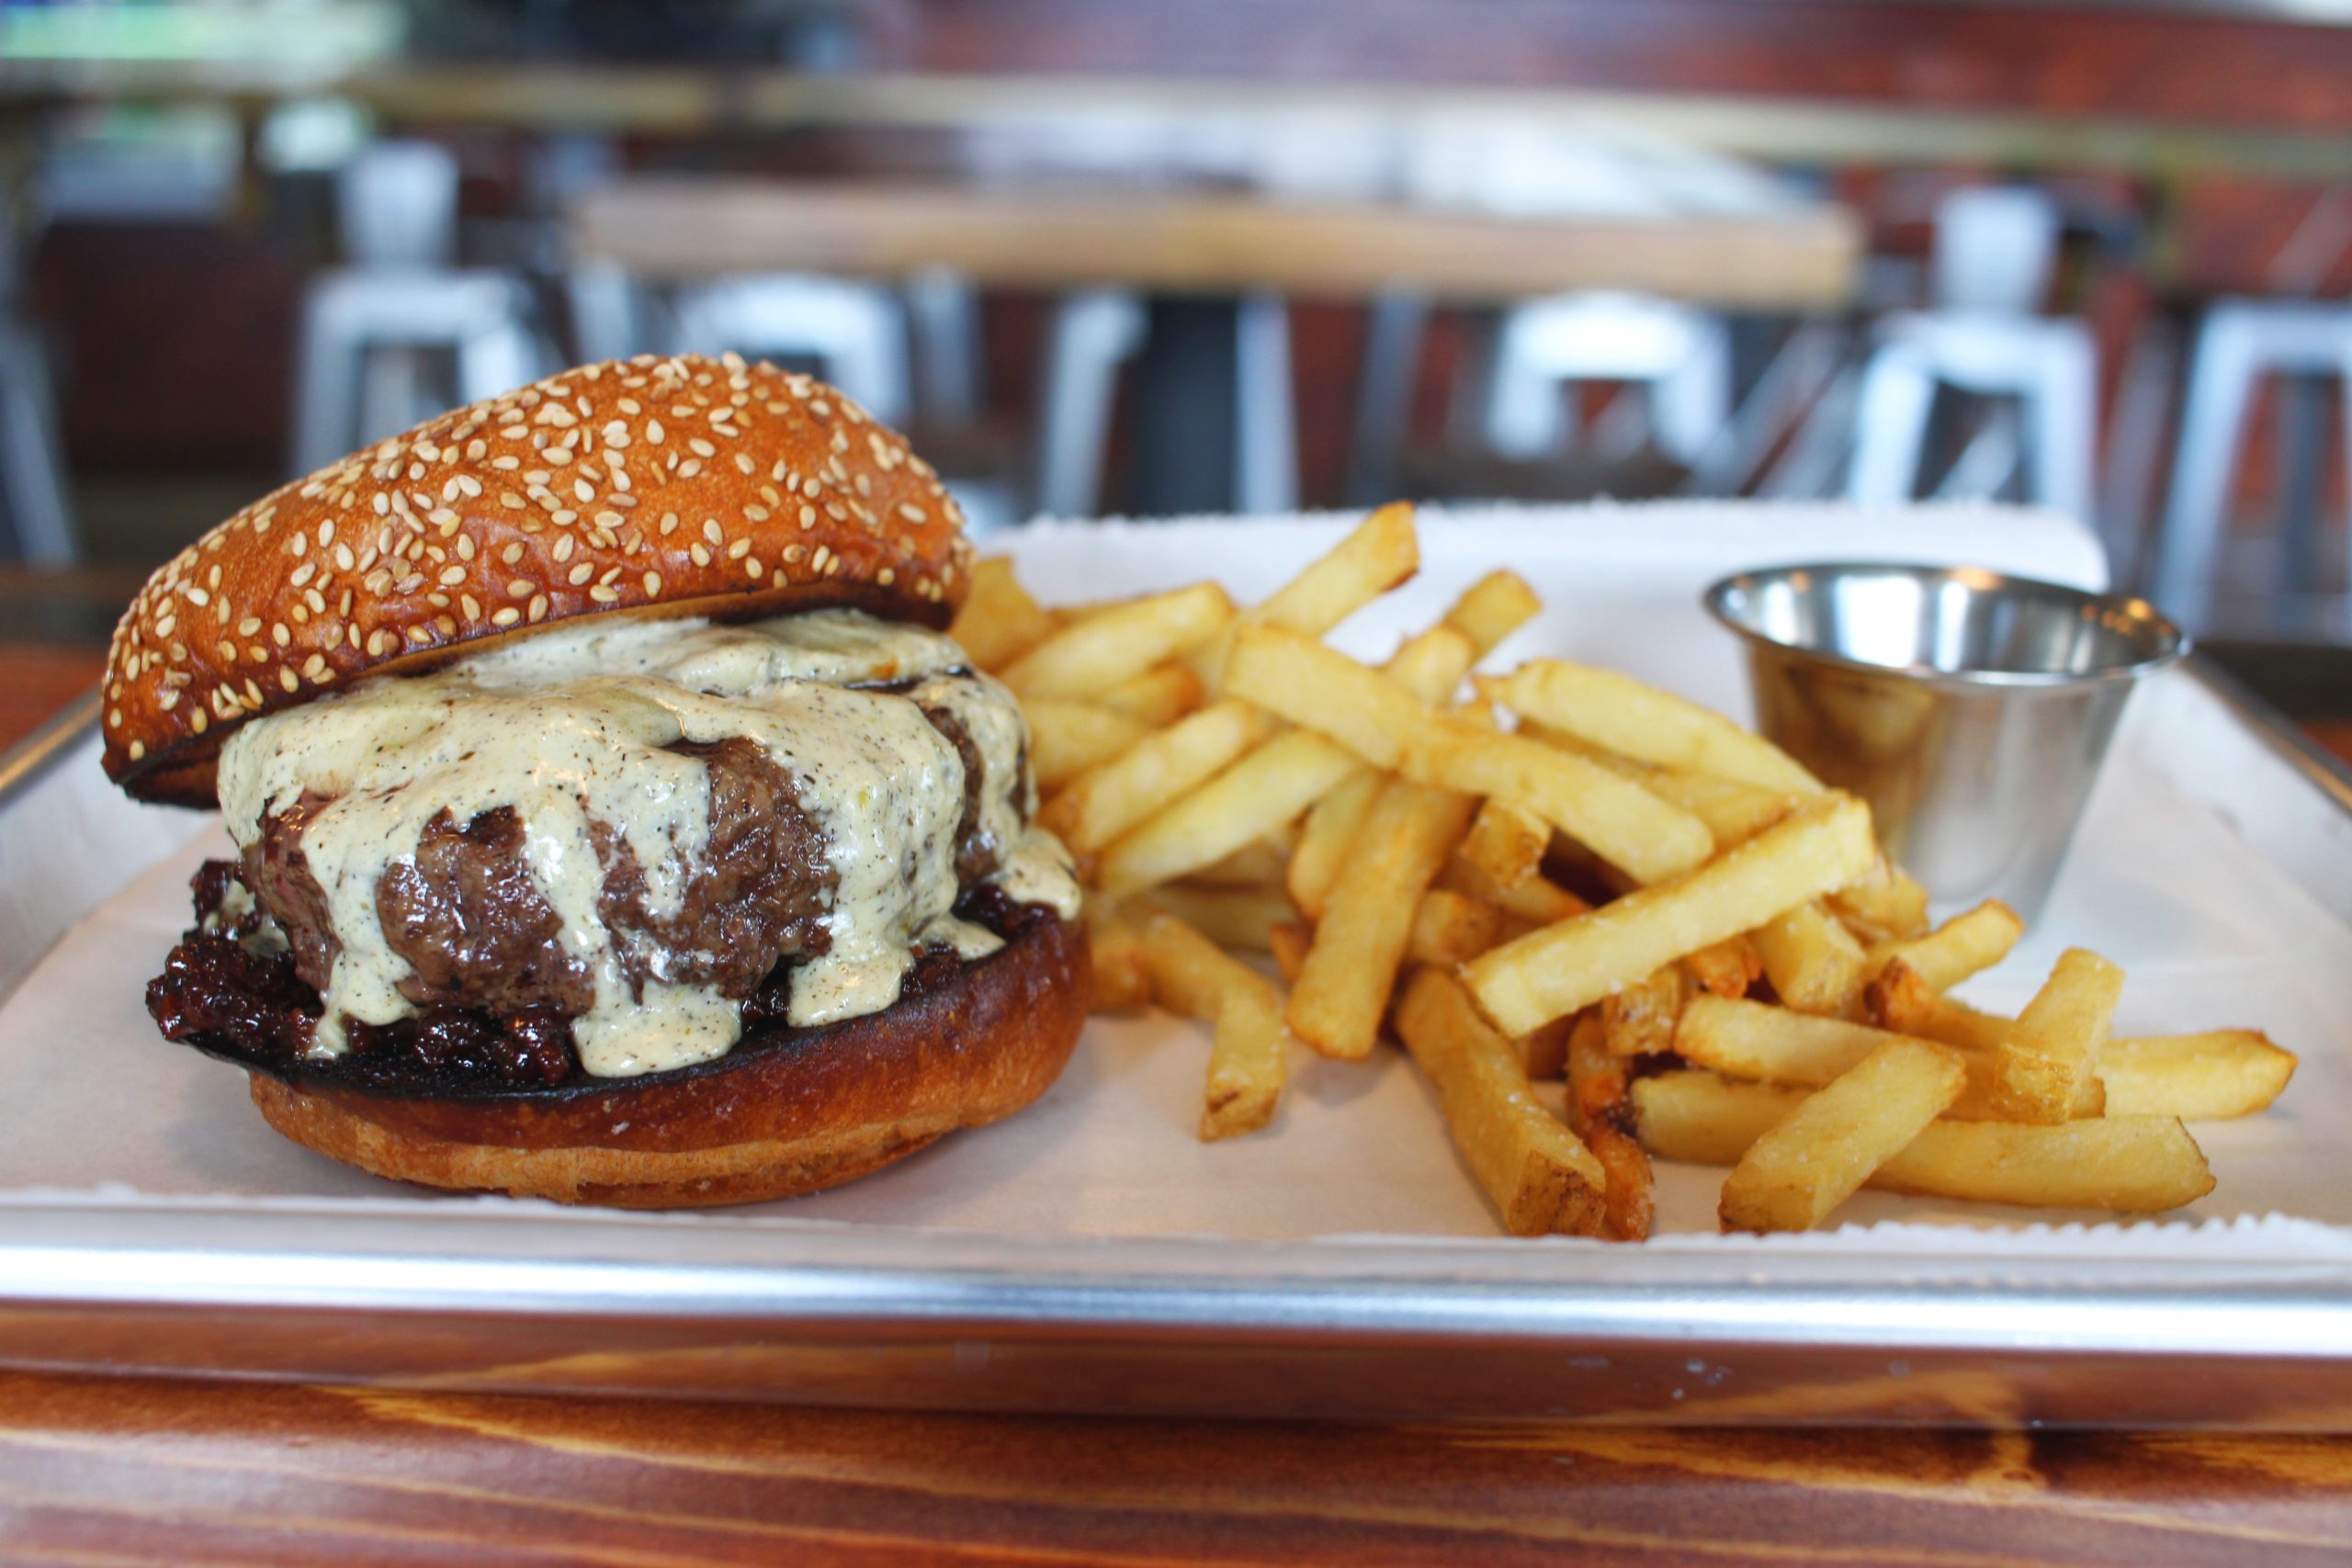 Classic Burger & Pomme Frites at The Lobby (Photo by Mark Whittaker)